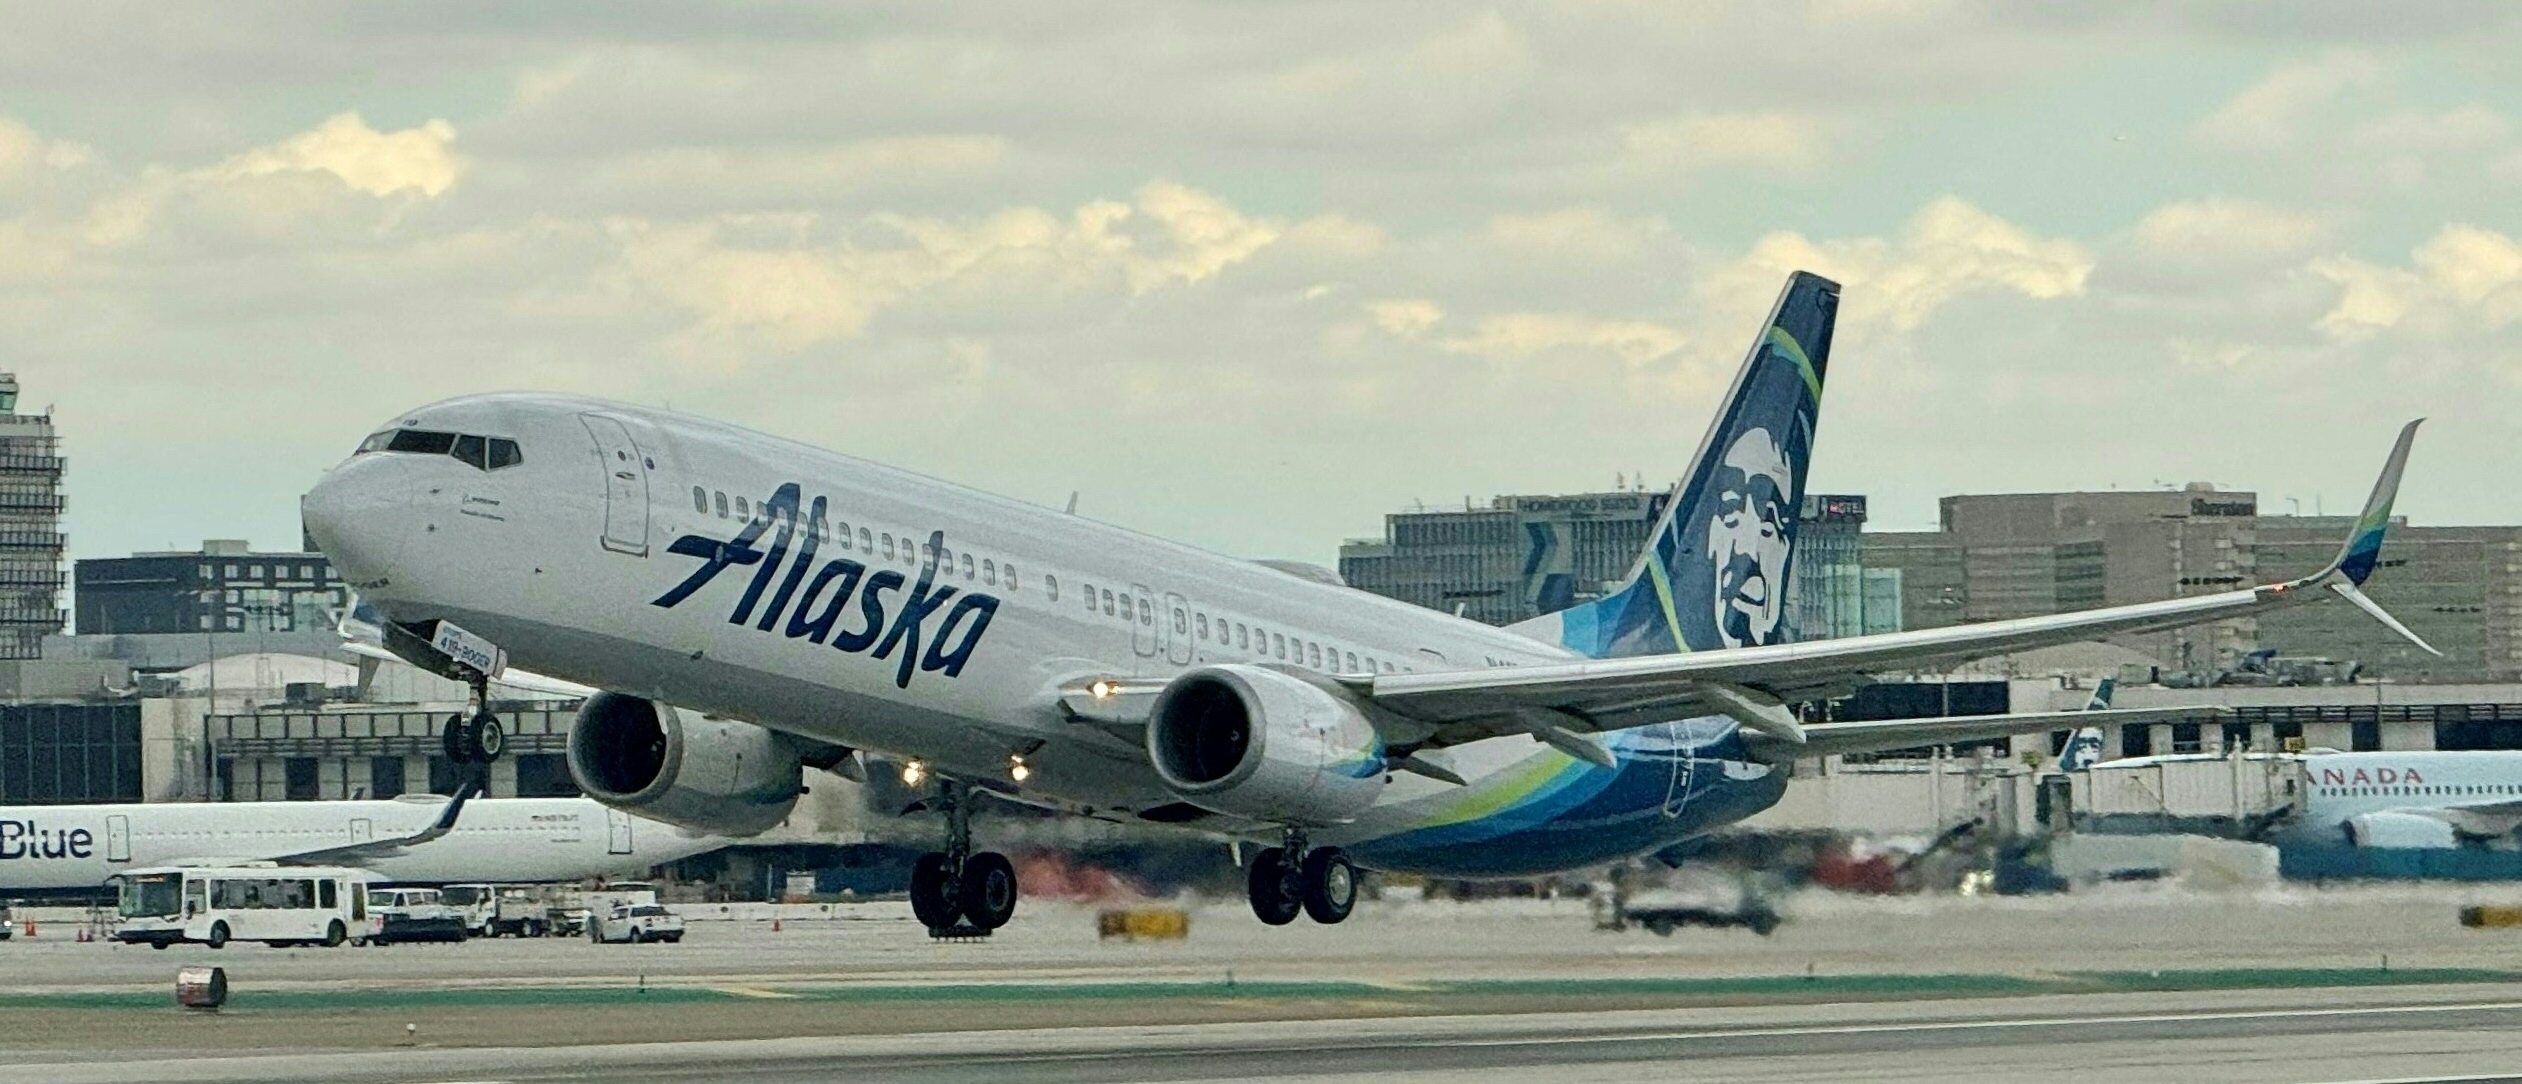  Alaska Airlines Passenger Pleads Guilty To Touching Woman On Plane To ‘Arouse His Sexual Desire,’ DOJ Says 